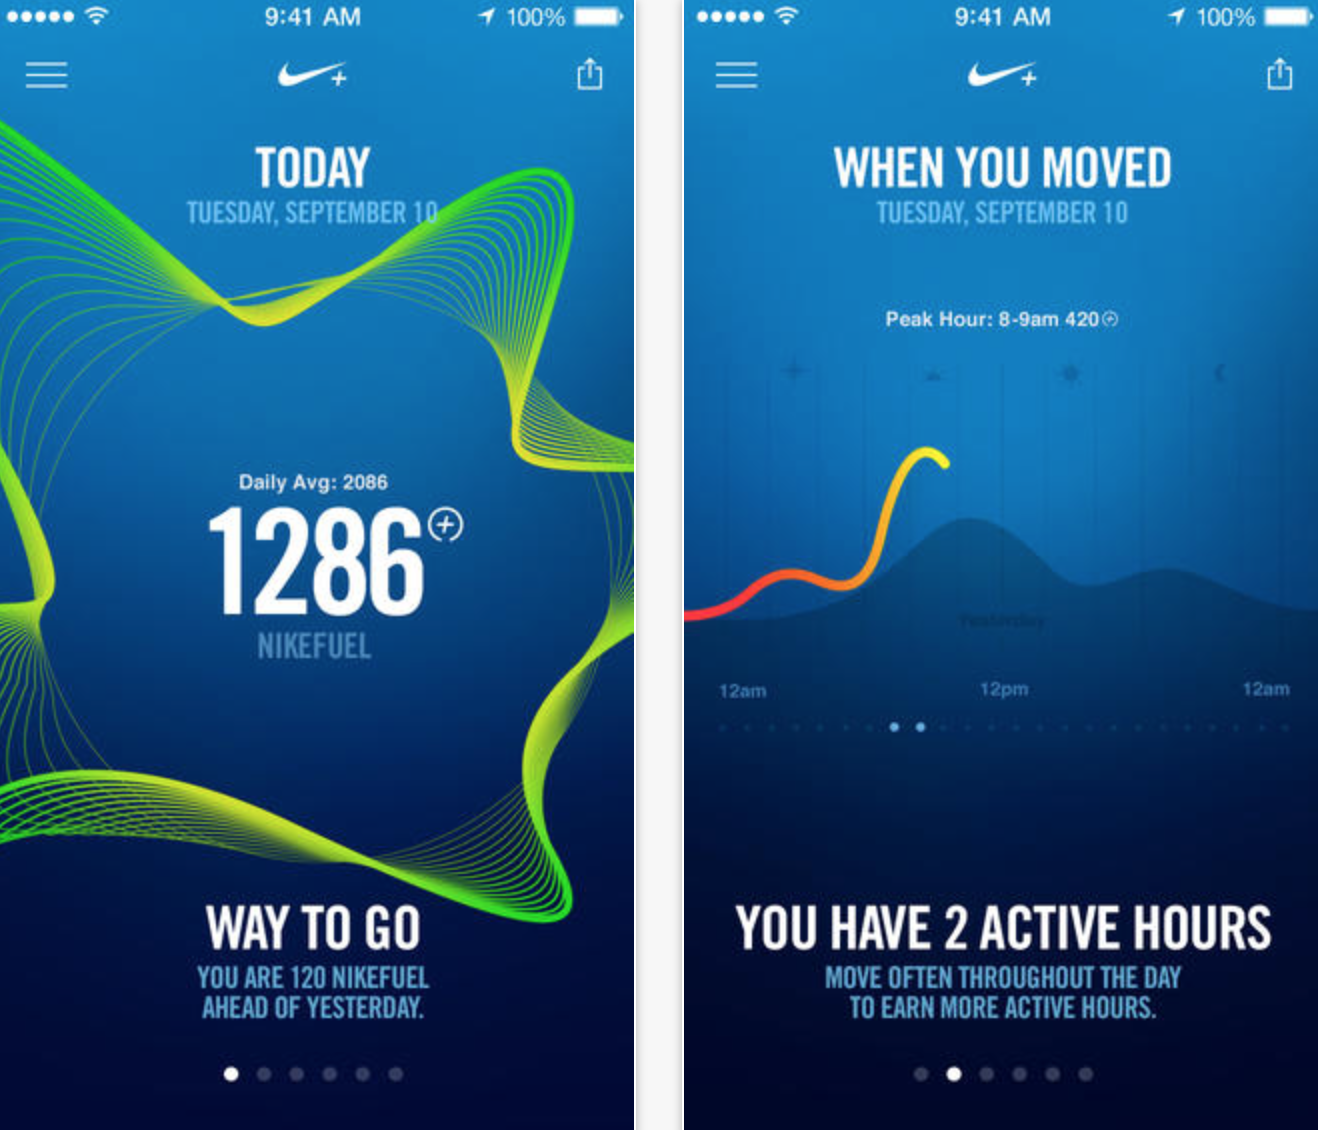 Introduced at iPhone 5s event, M7integrated Nike+ Move fitness app